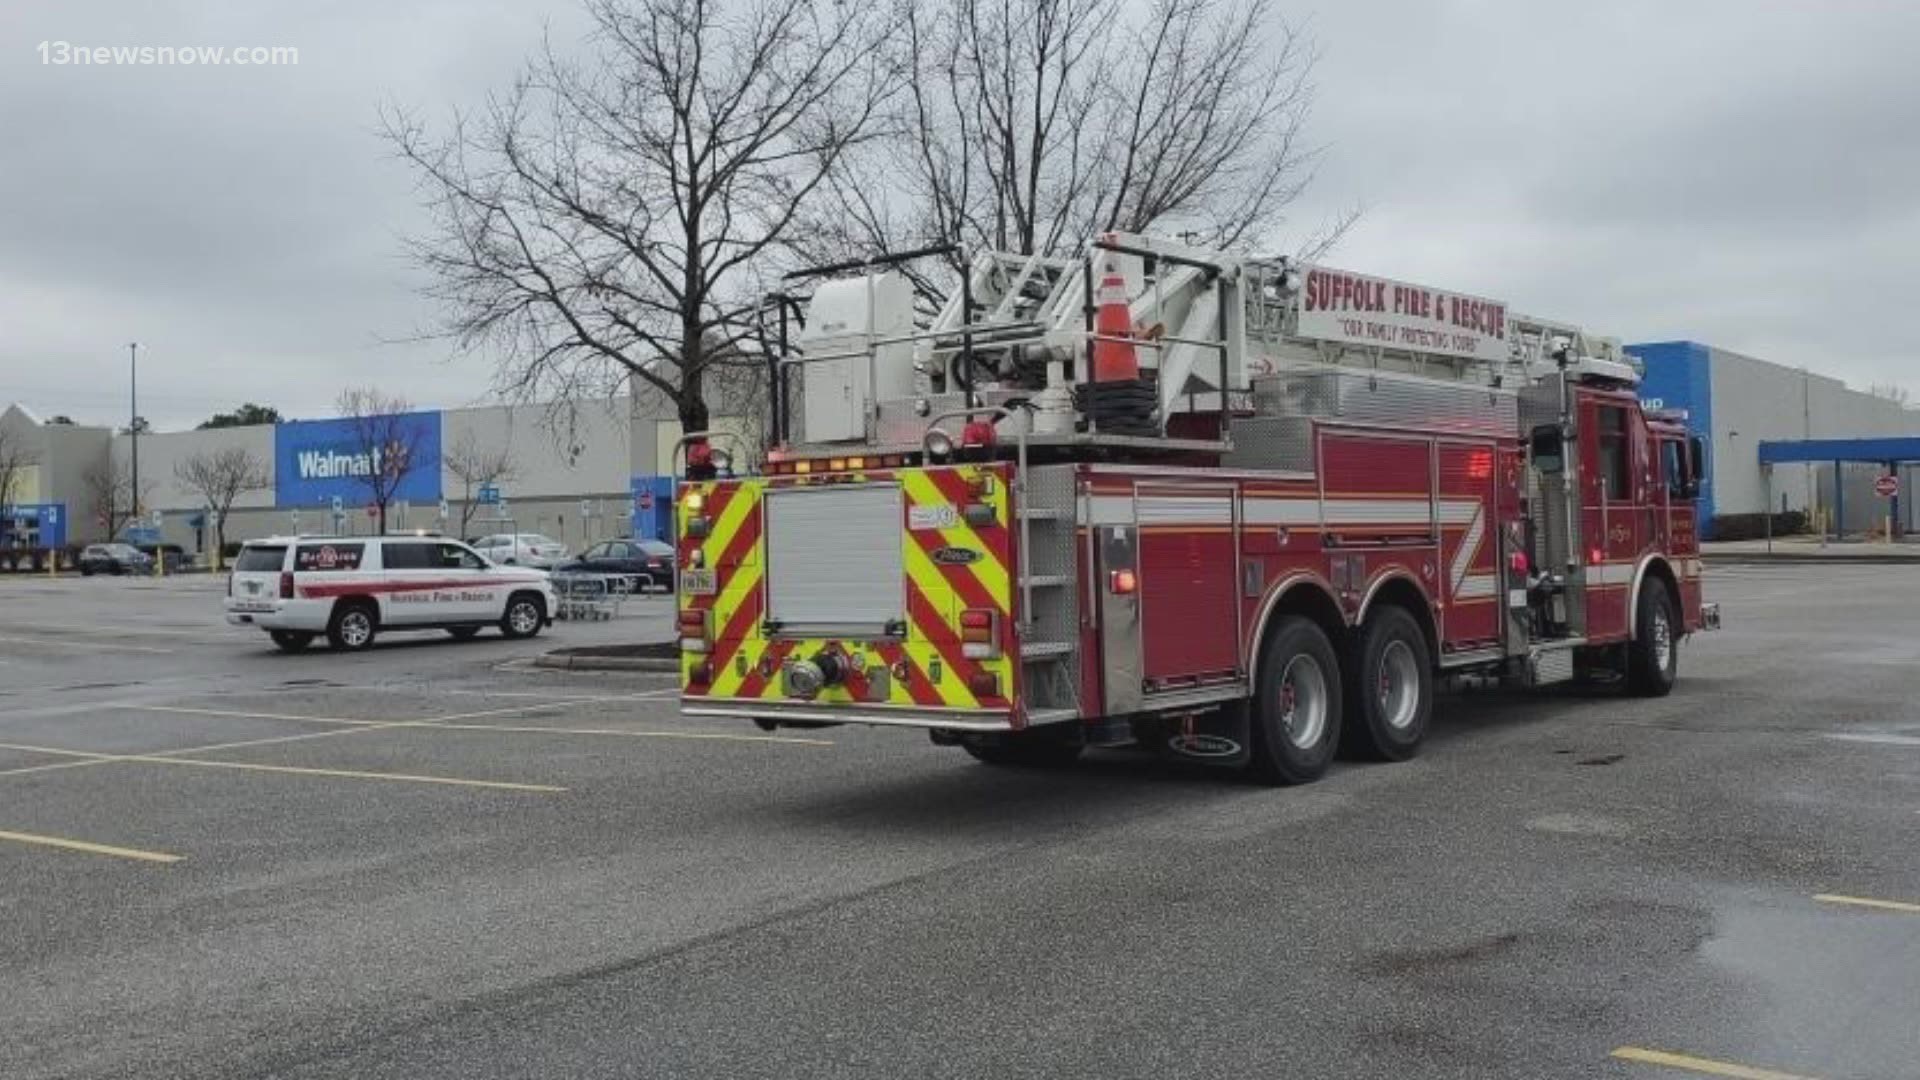 Crews were able to repair a gas leak after a car hit a major gas line at a Walmart Supercenter on College Drive in Suffolk.